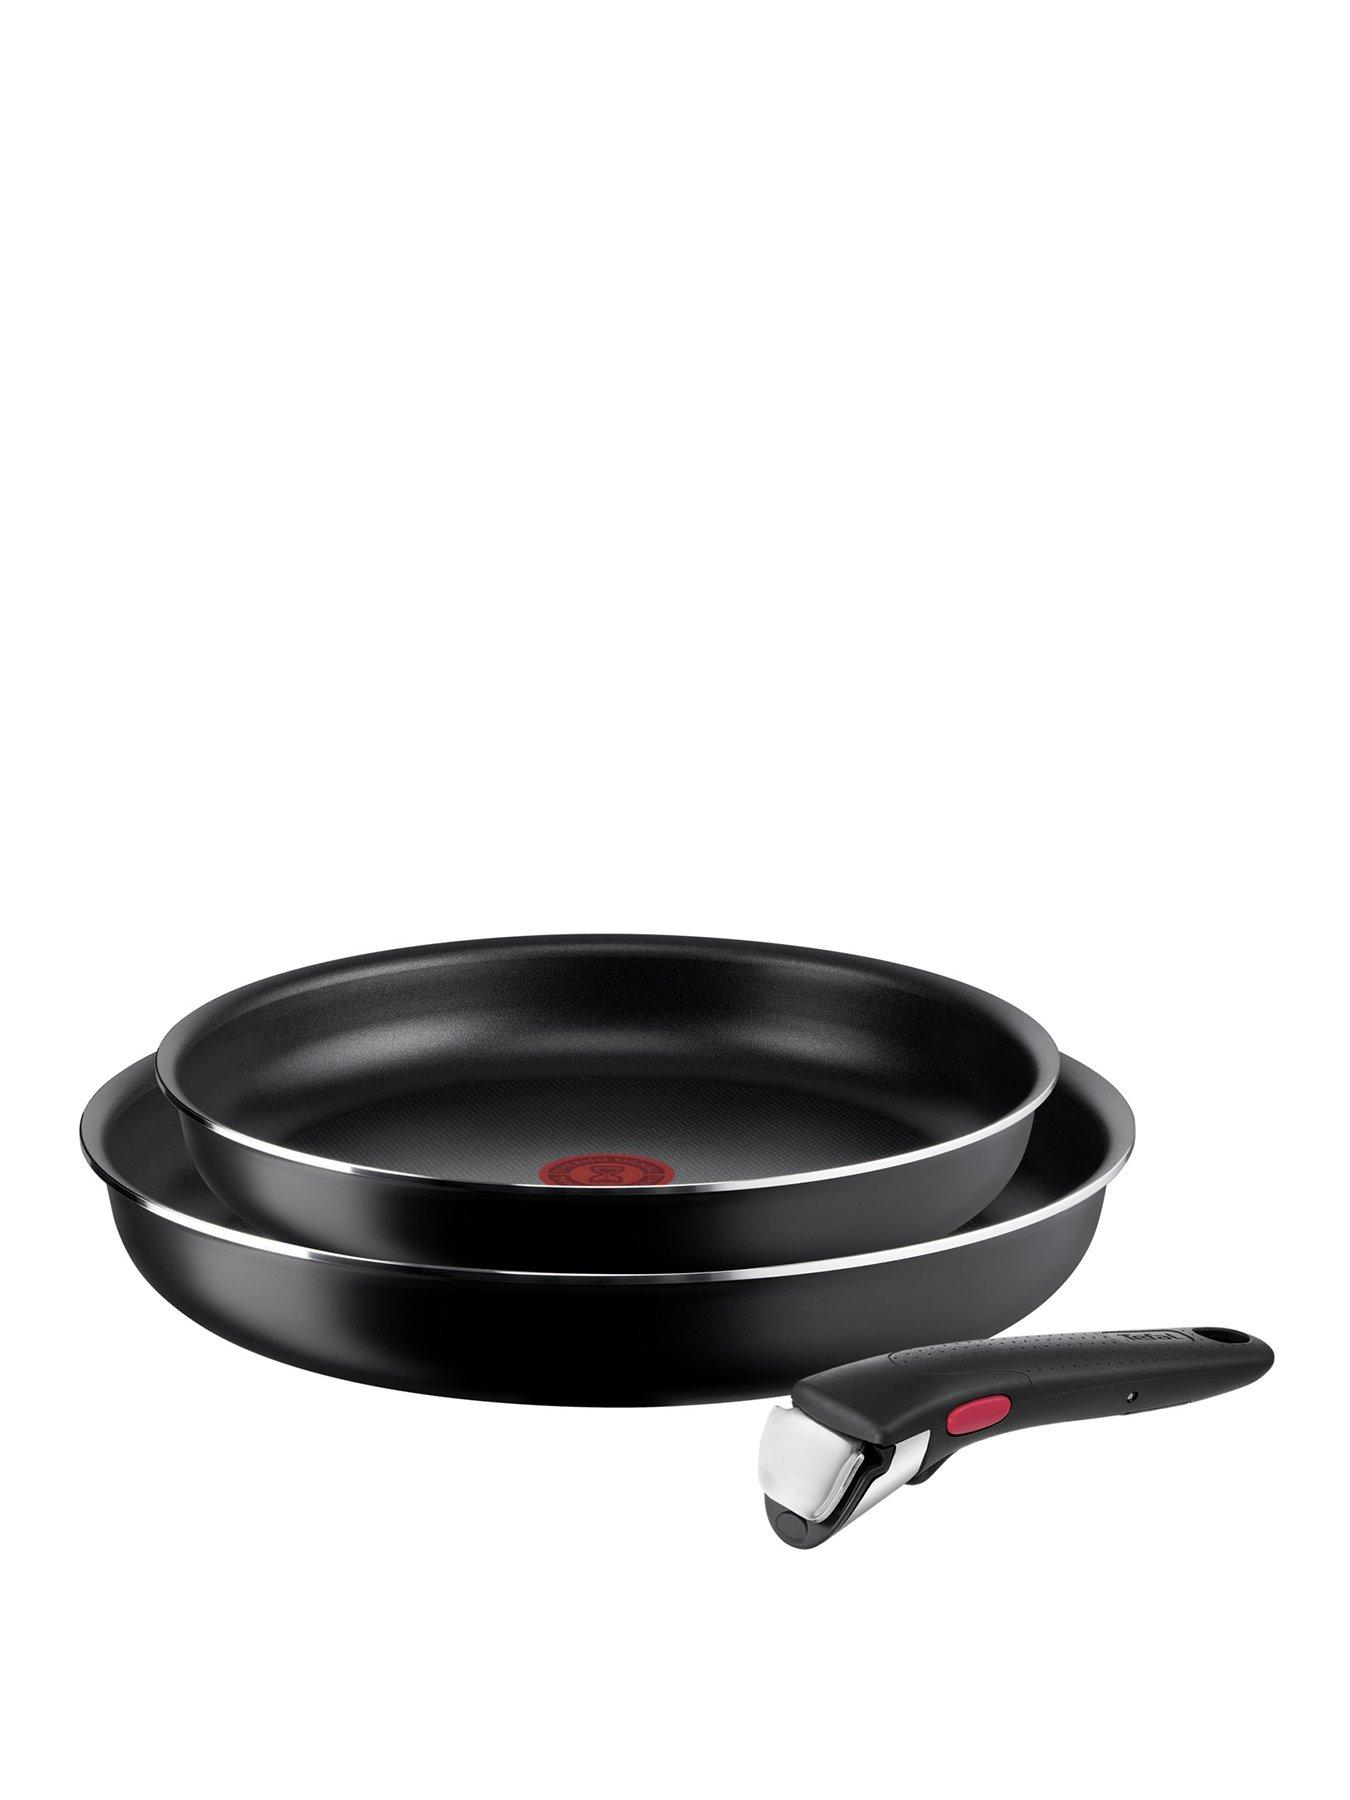 Jamie Oliver by Tefal Ingenio Stainless Steel Cookware Set 9 Piece